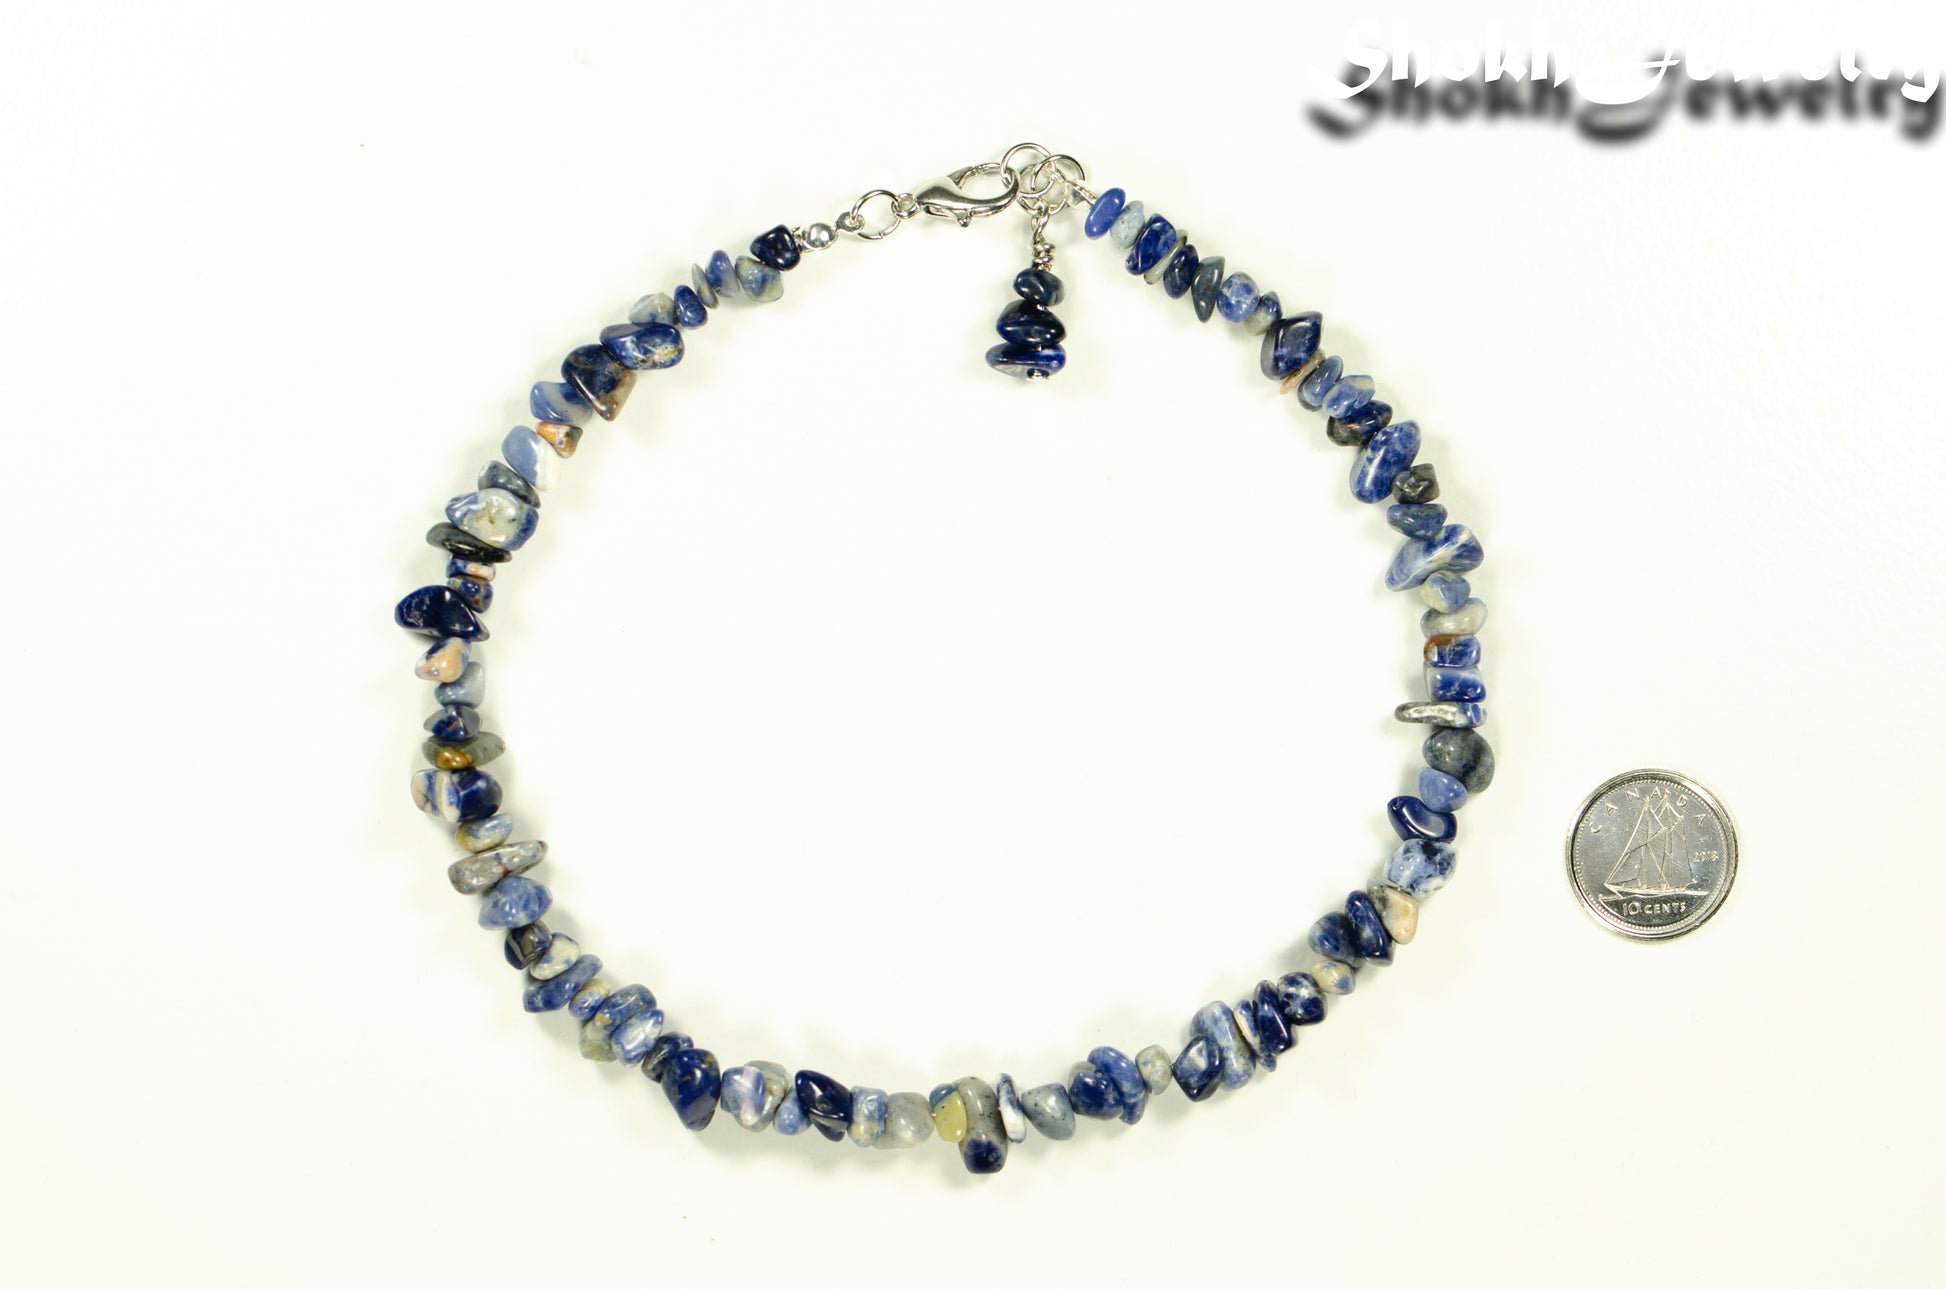 Natural Sodalite Crystal Chip Choker Necklace beside a dime.